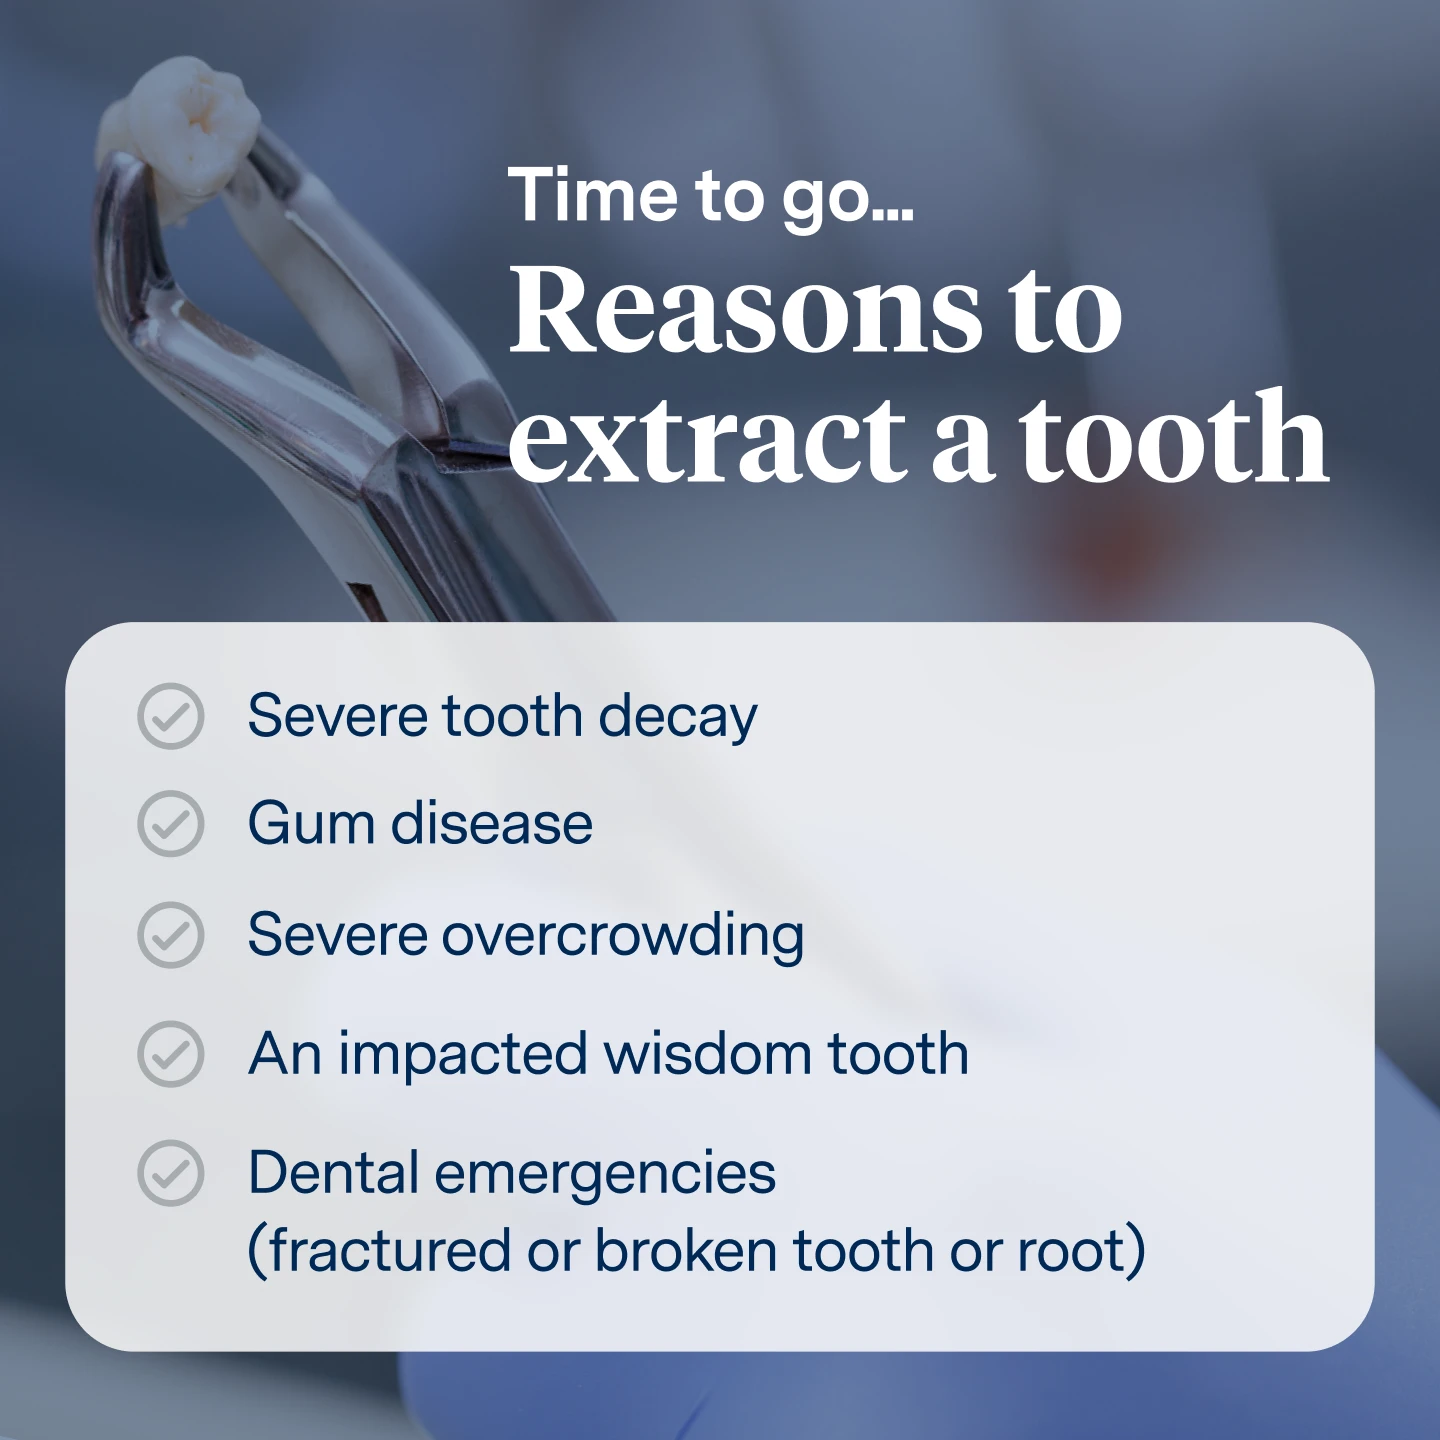 Time to go... Reasons to extract a tooth: severe tooth decay, gum disease, severe overcrowding, an impacted wisdom tooth, dental emergencies (fractured/broken tooth or root. 